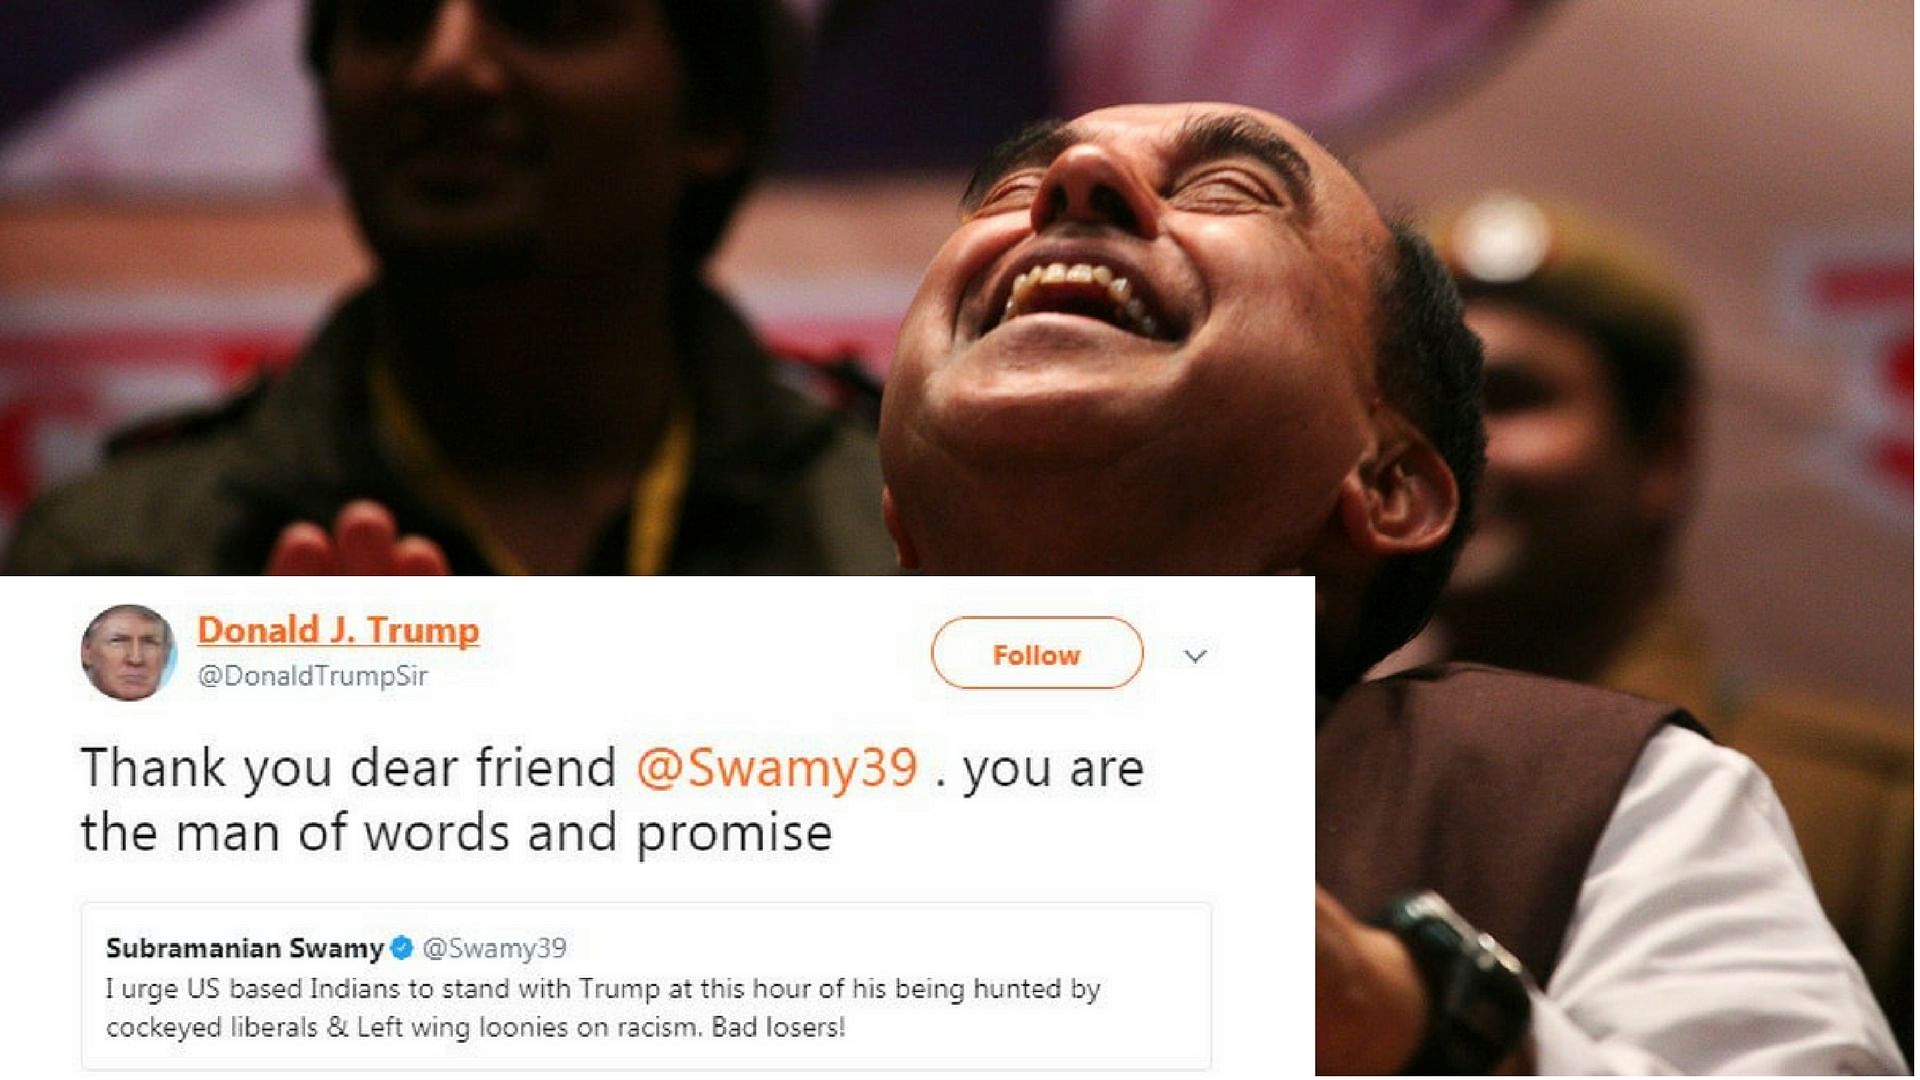 Subramanian Swamy gets trolled